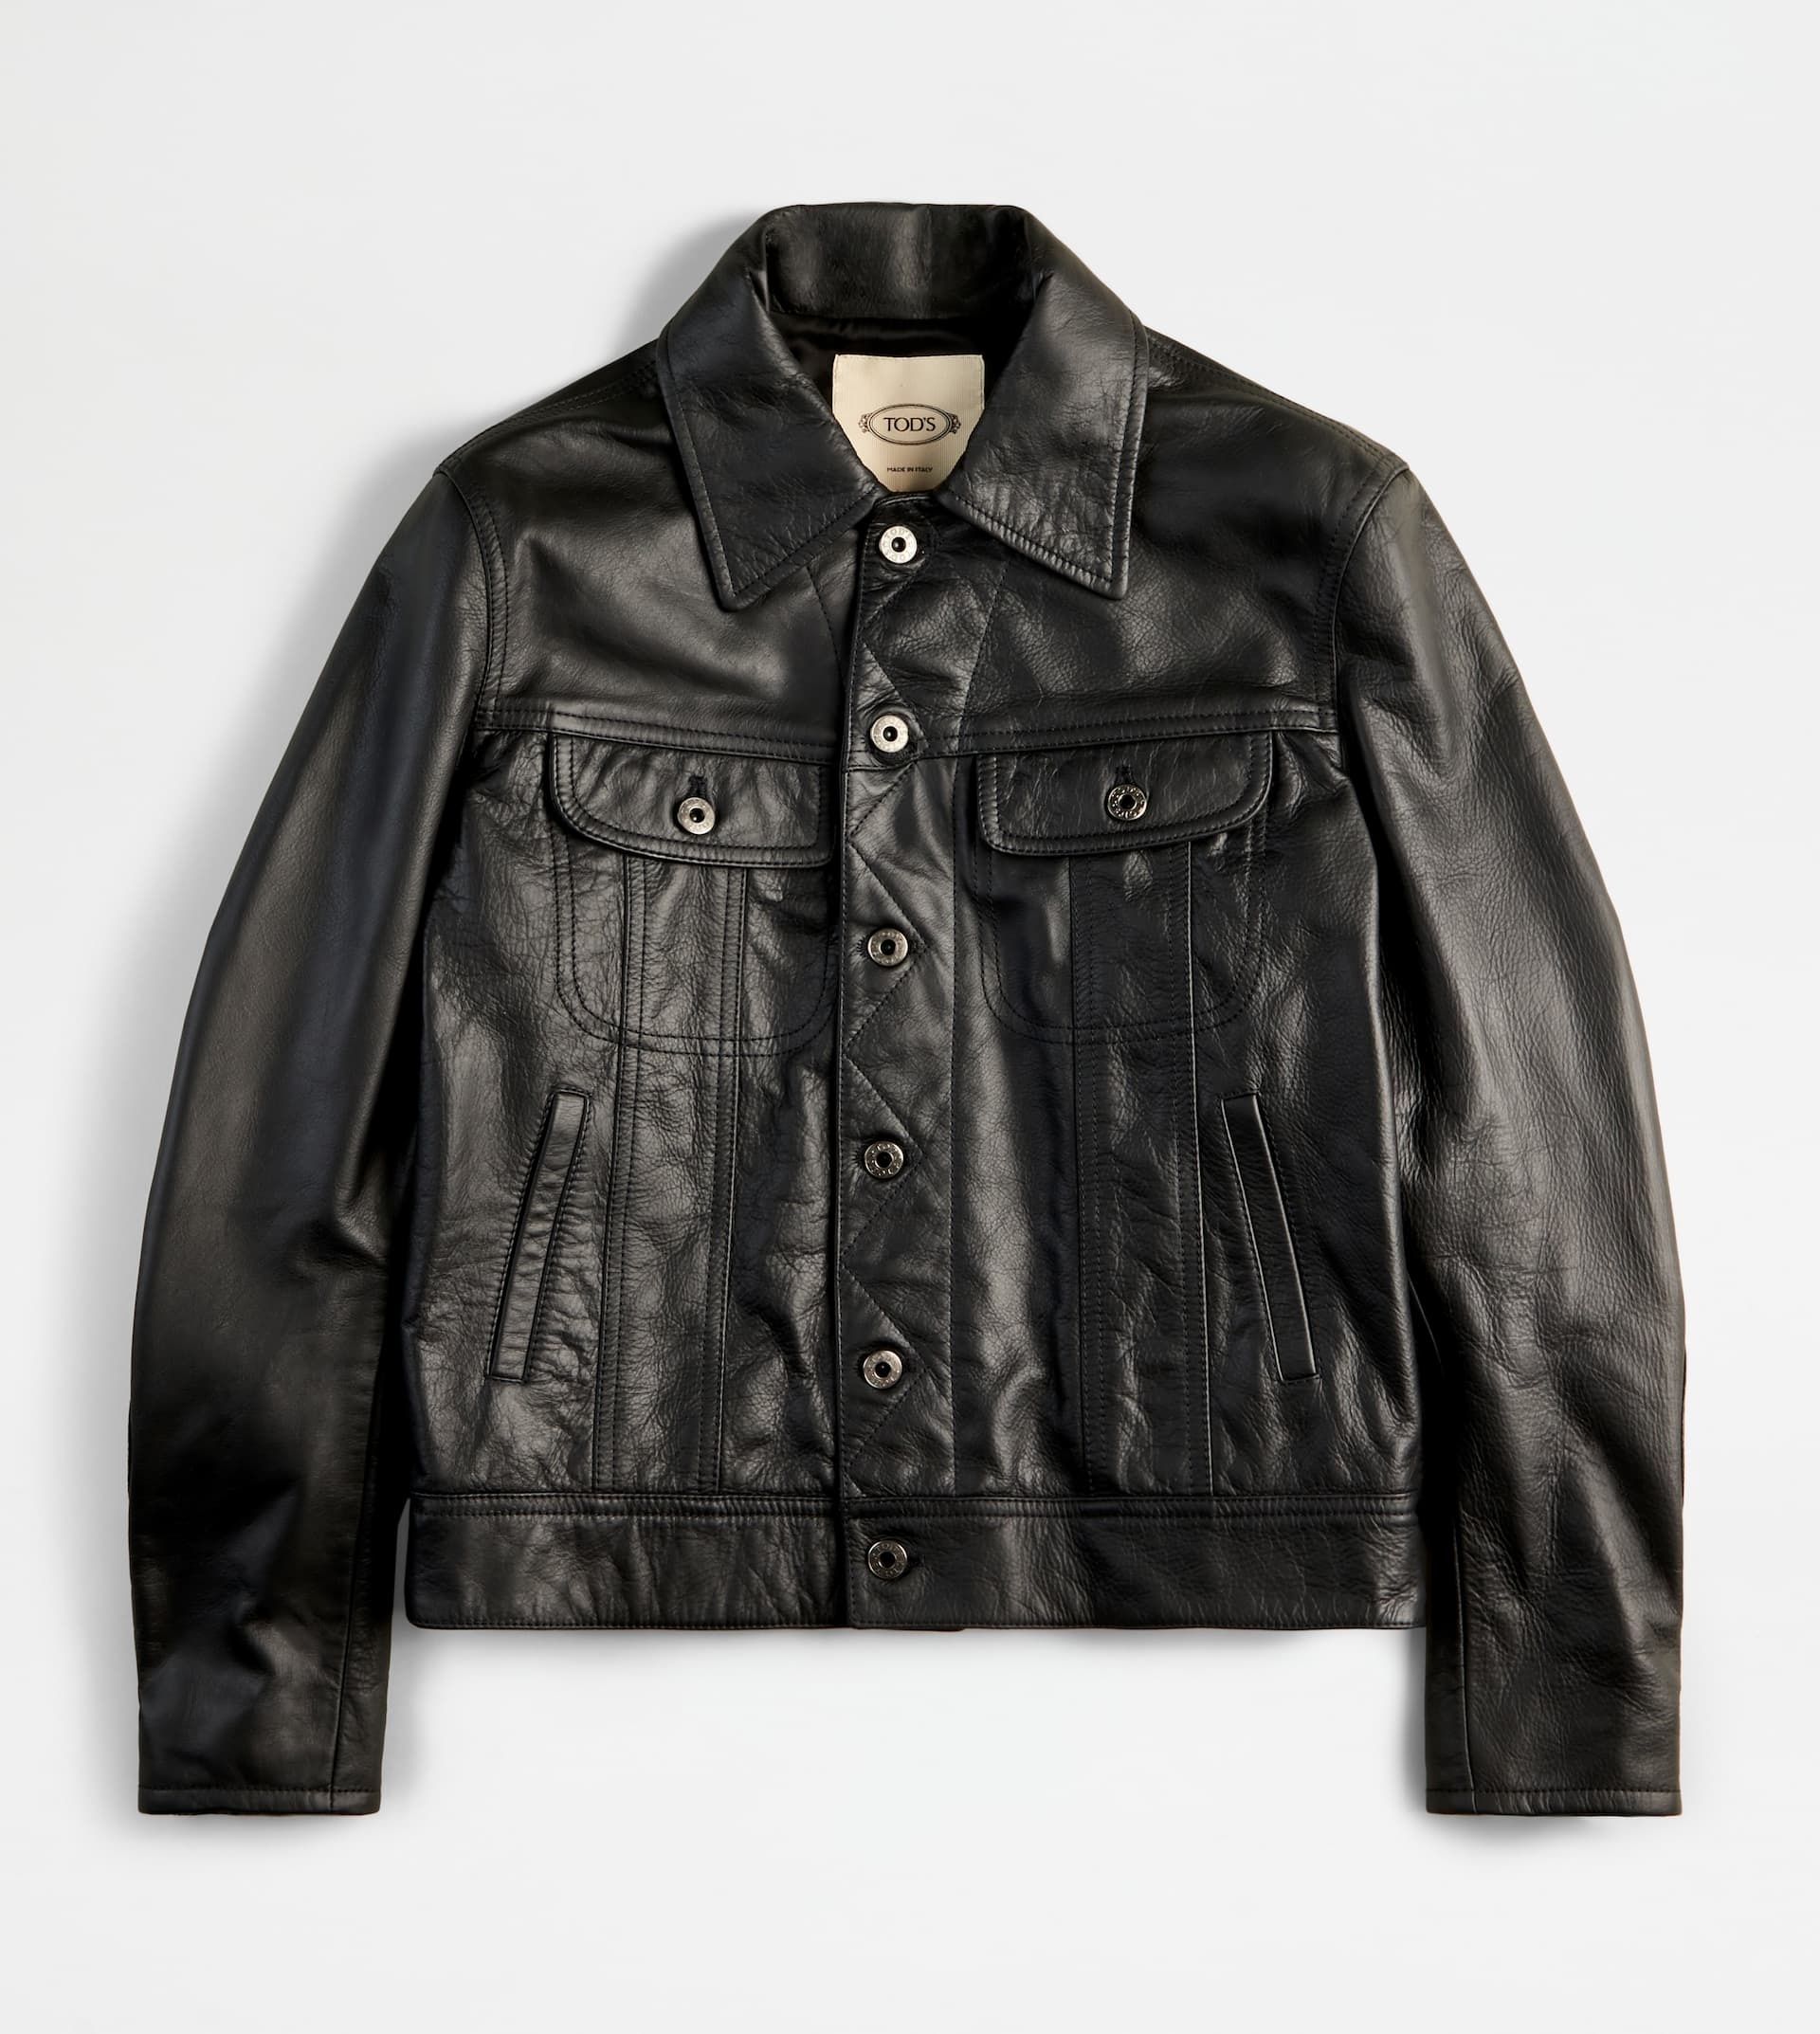 JACKET IN LEATHER - BLACK - 1